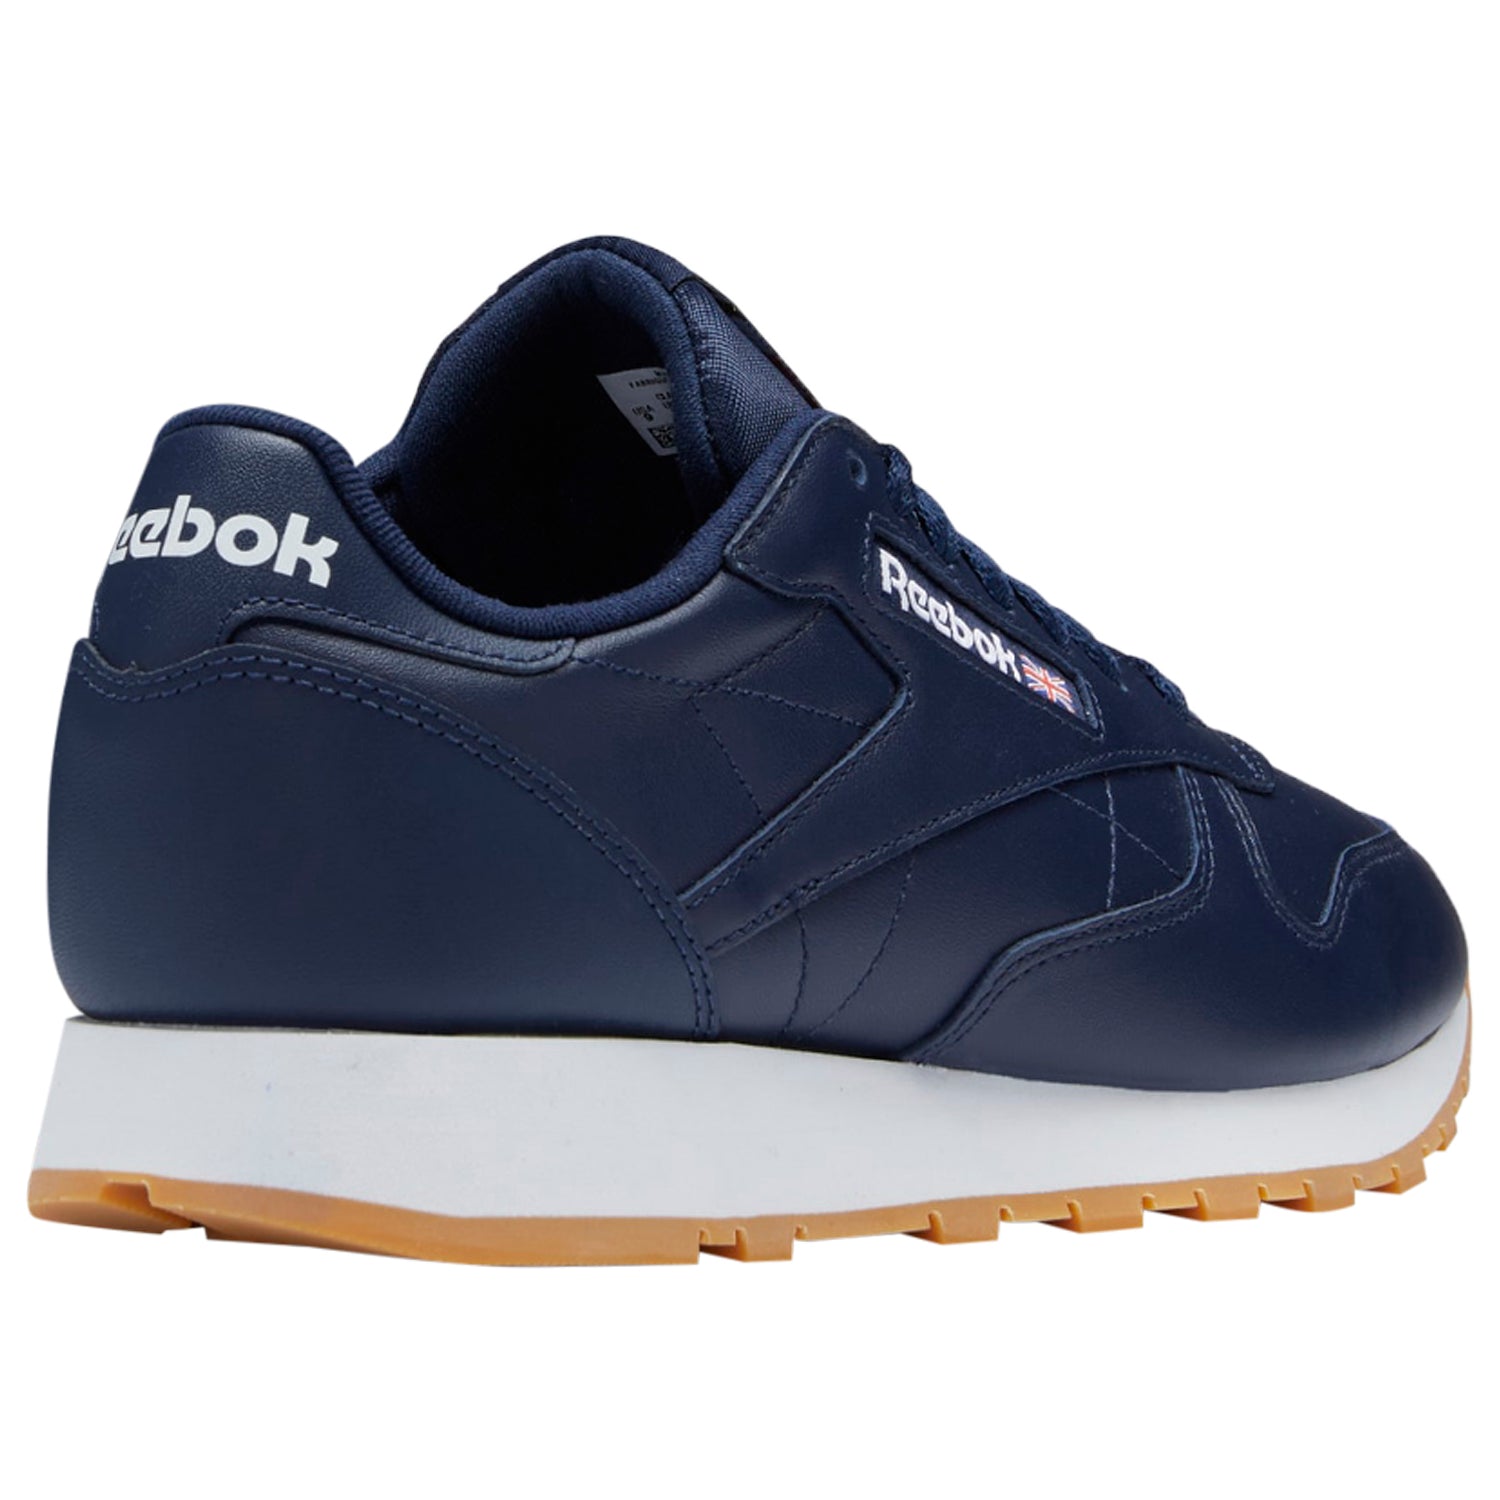 Reebok Classic Leather Shoes Mens Style : Gy3600